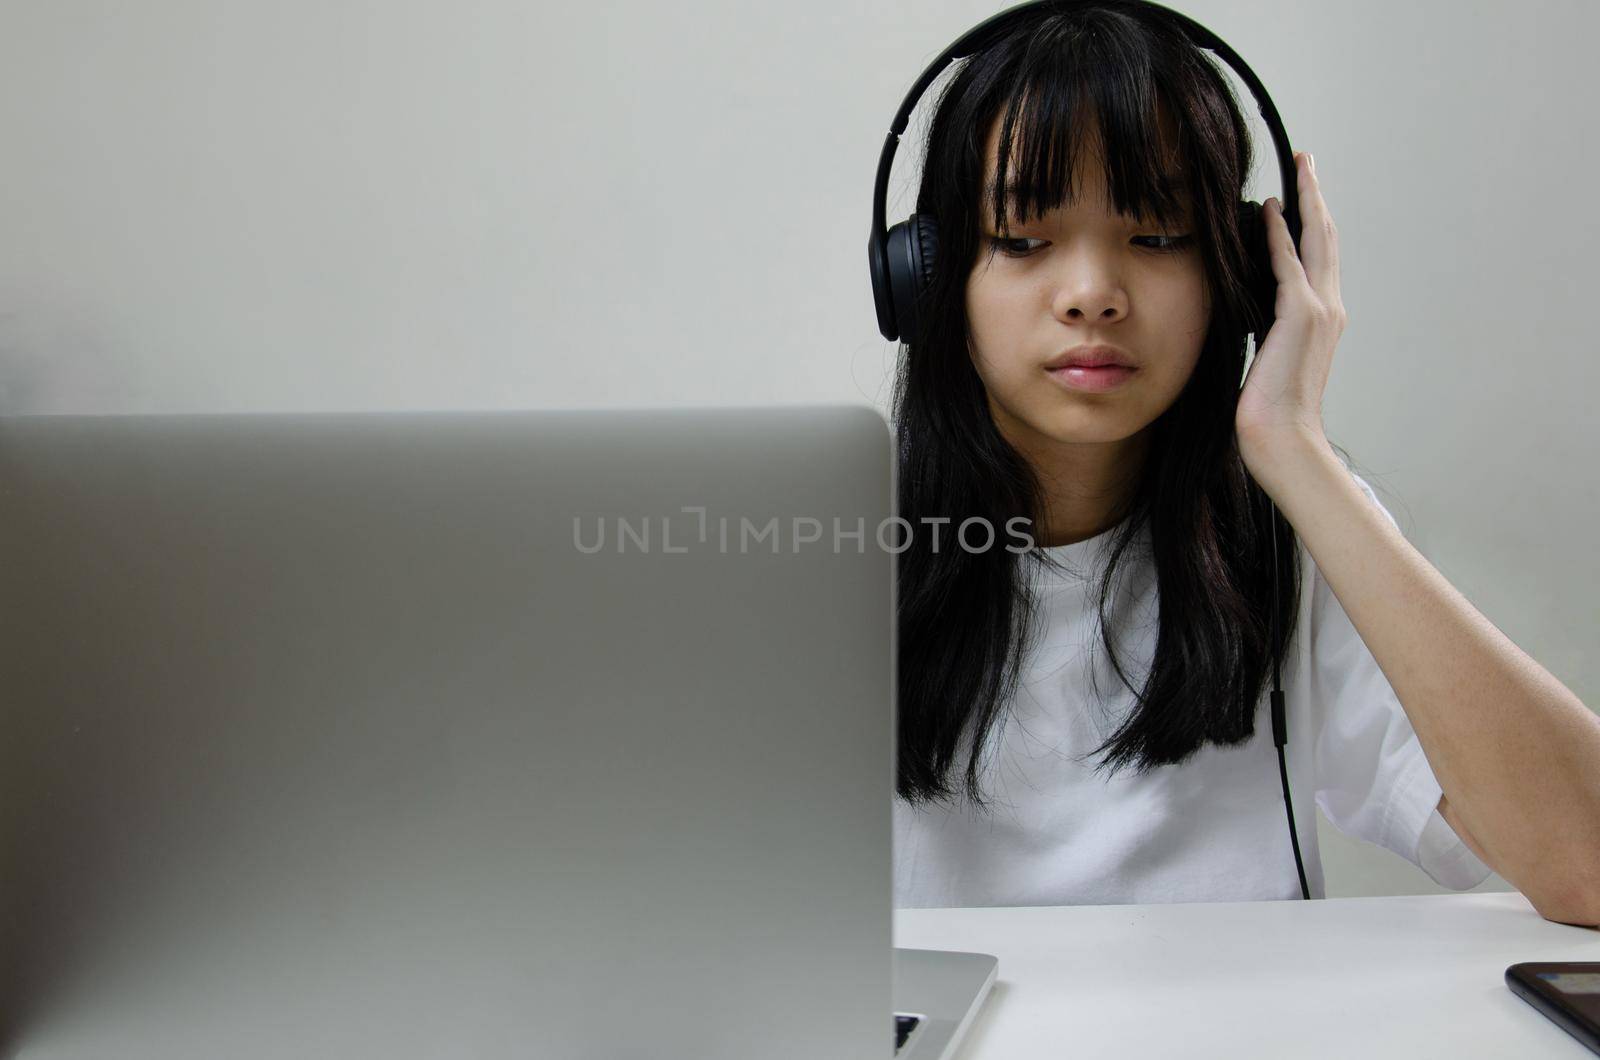 girl wearing headphones studying online with computer laptop and listen to relaxing music or play internet social media at home. by aoo3771